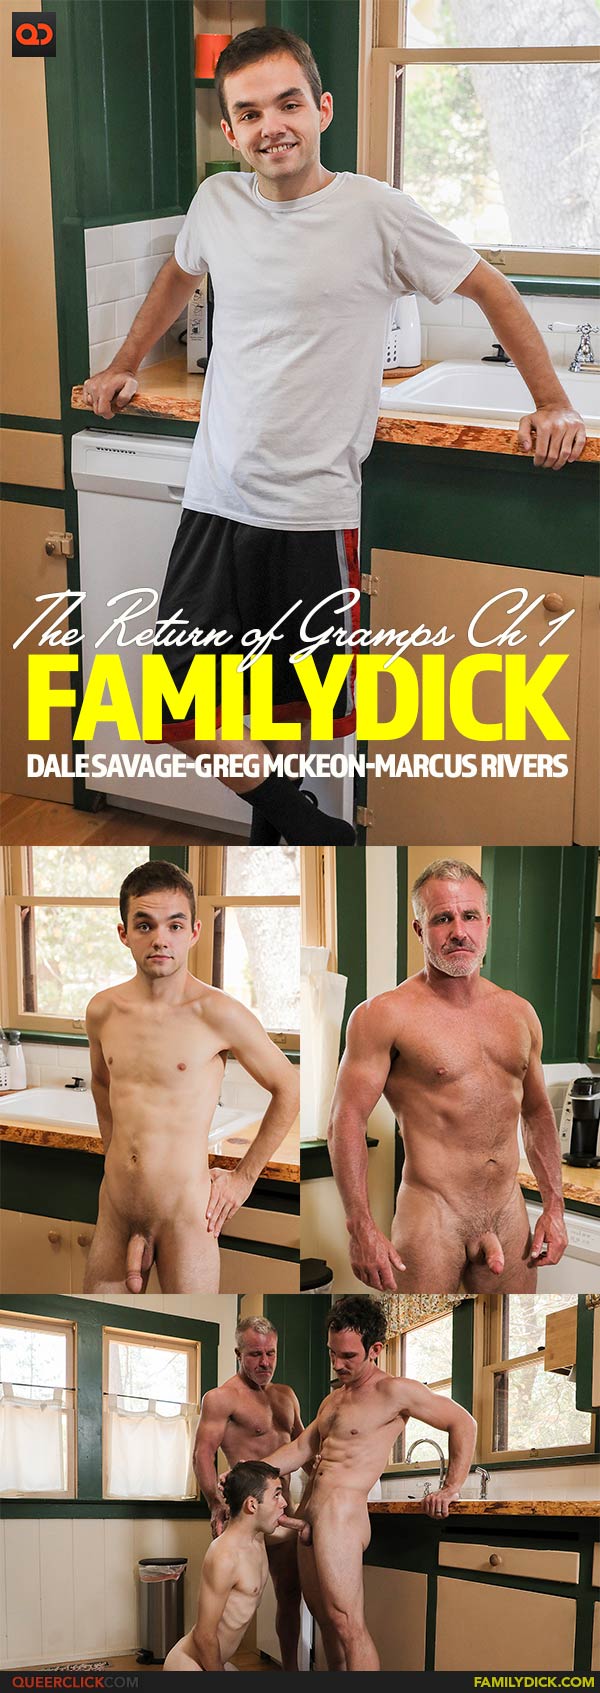 Family Dick: The Return of Gramps Ch 1: Family Nudists - Dale Savage, Greg McKeon and Marcus Rivers